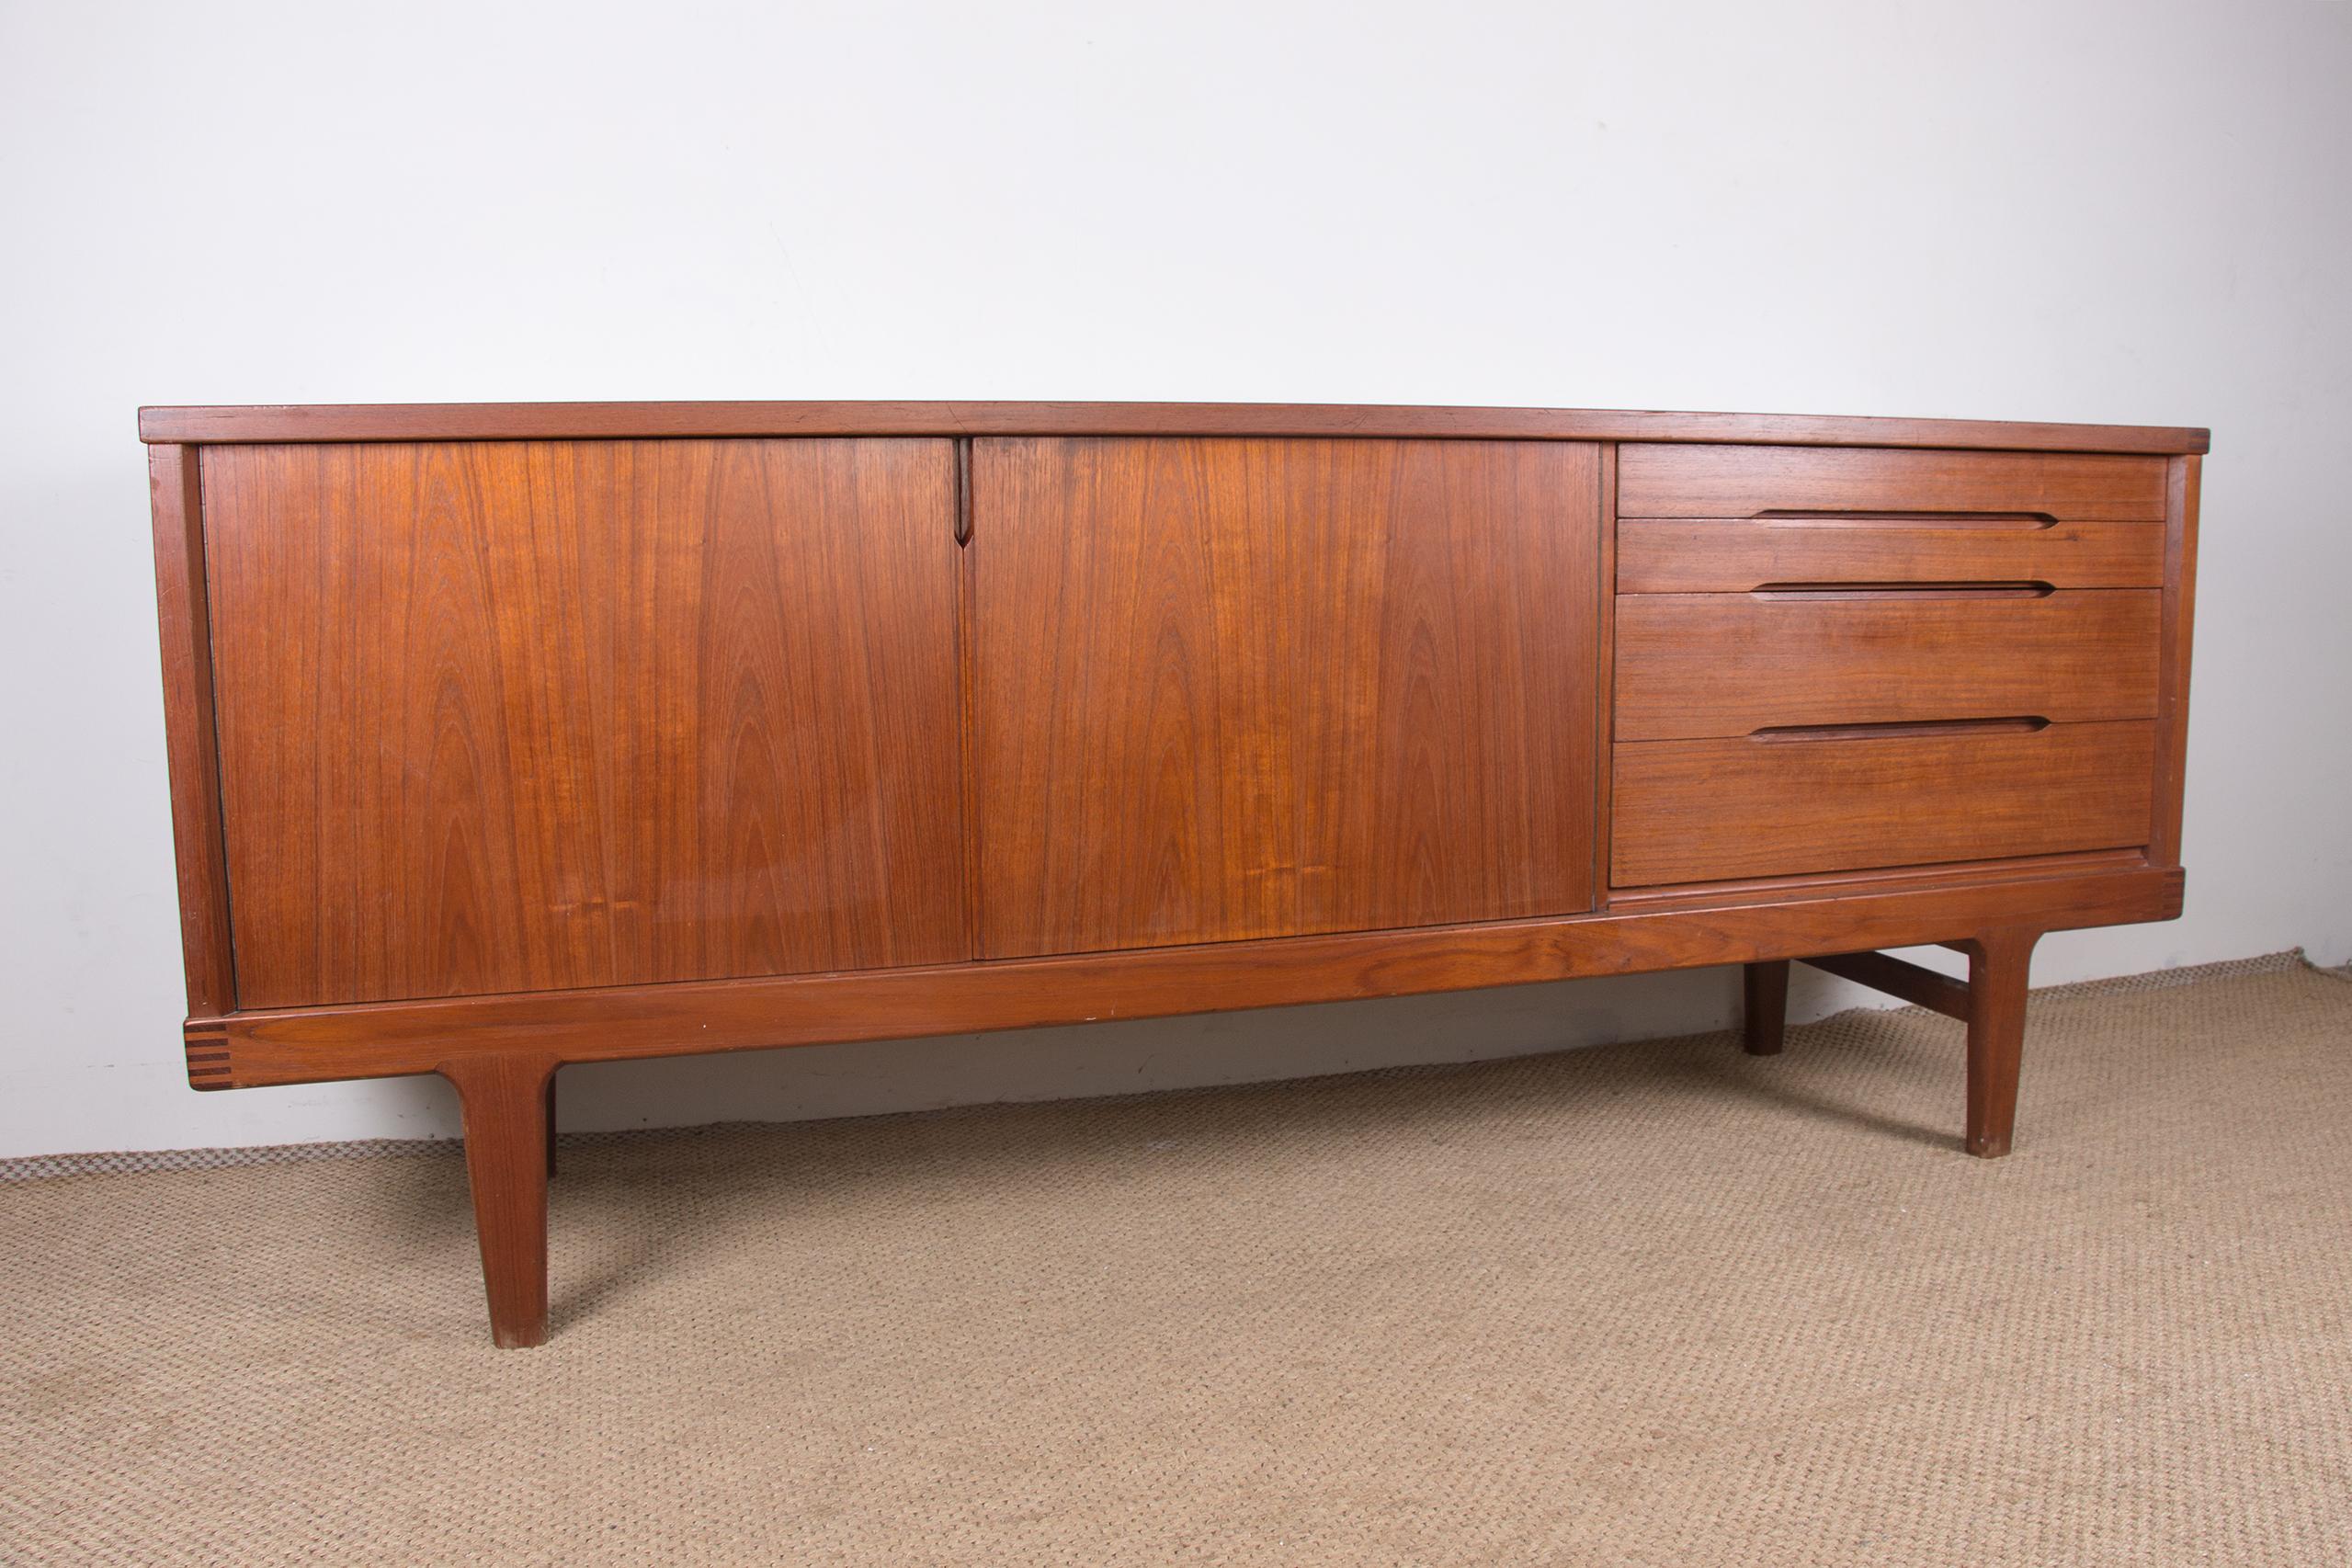 Beautiful Scandinavian sideboard in an elegant brutalist style. 2 sliding doors on the left side open onto a large shelf. 4 drawers of different sizes on the right side with integrated handles. The back is veneered in teak. Large storage capacity.